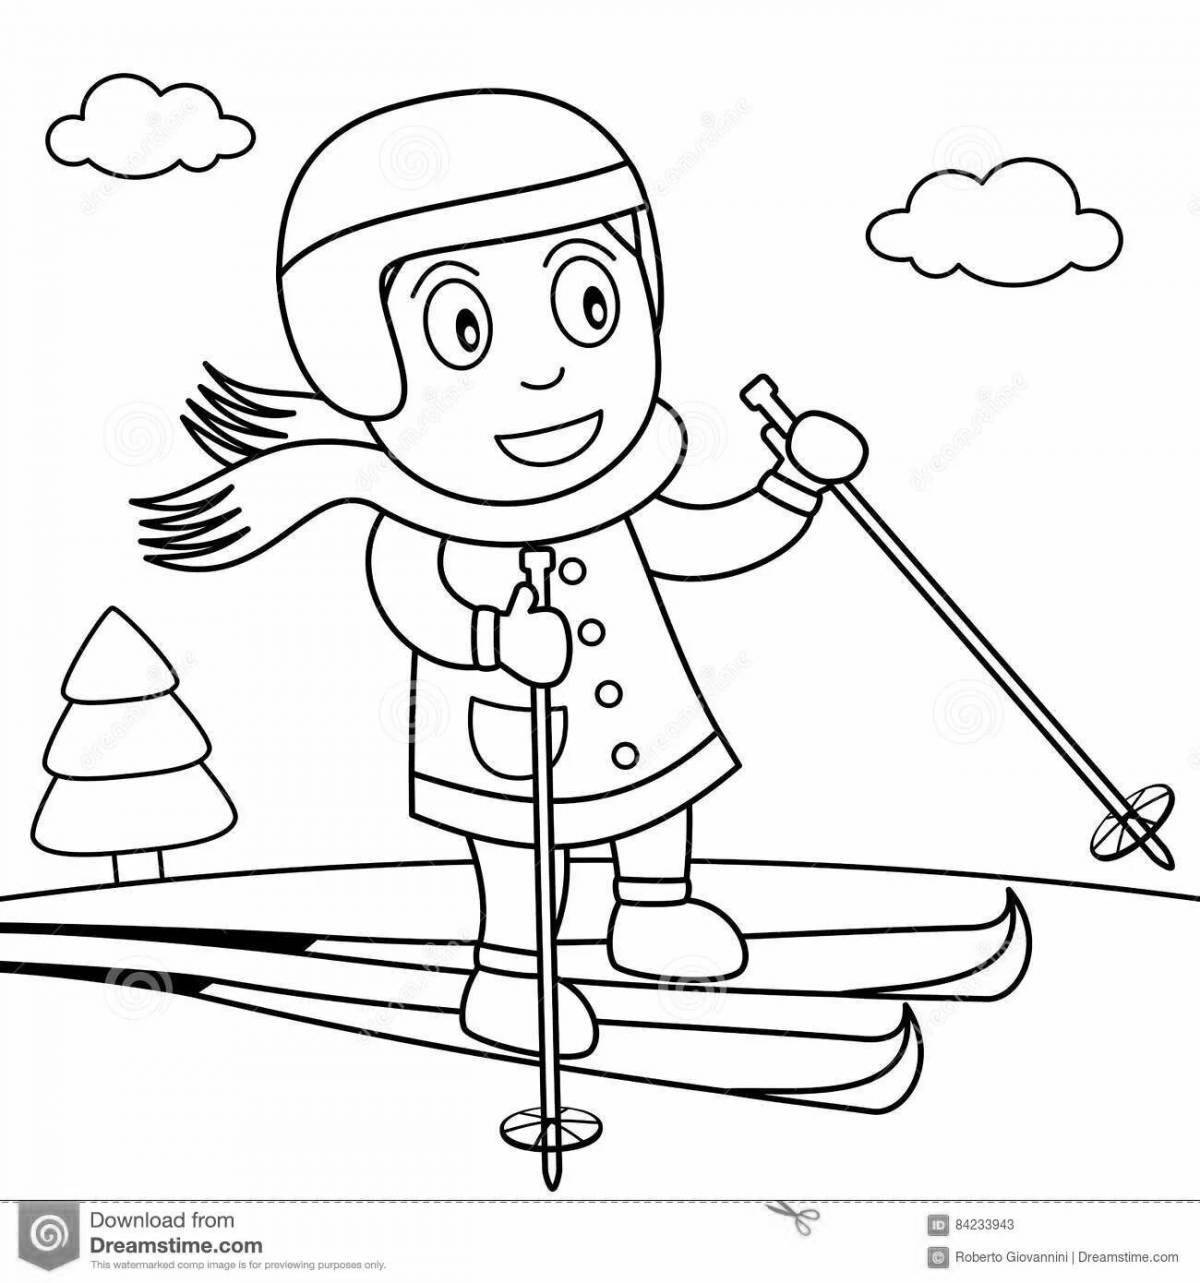 Coloring book playful skier for children 6-7 years old